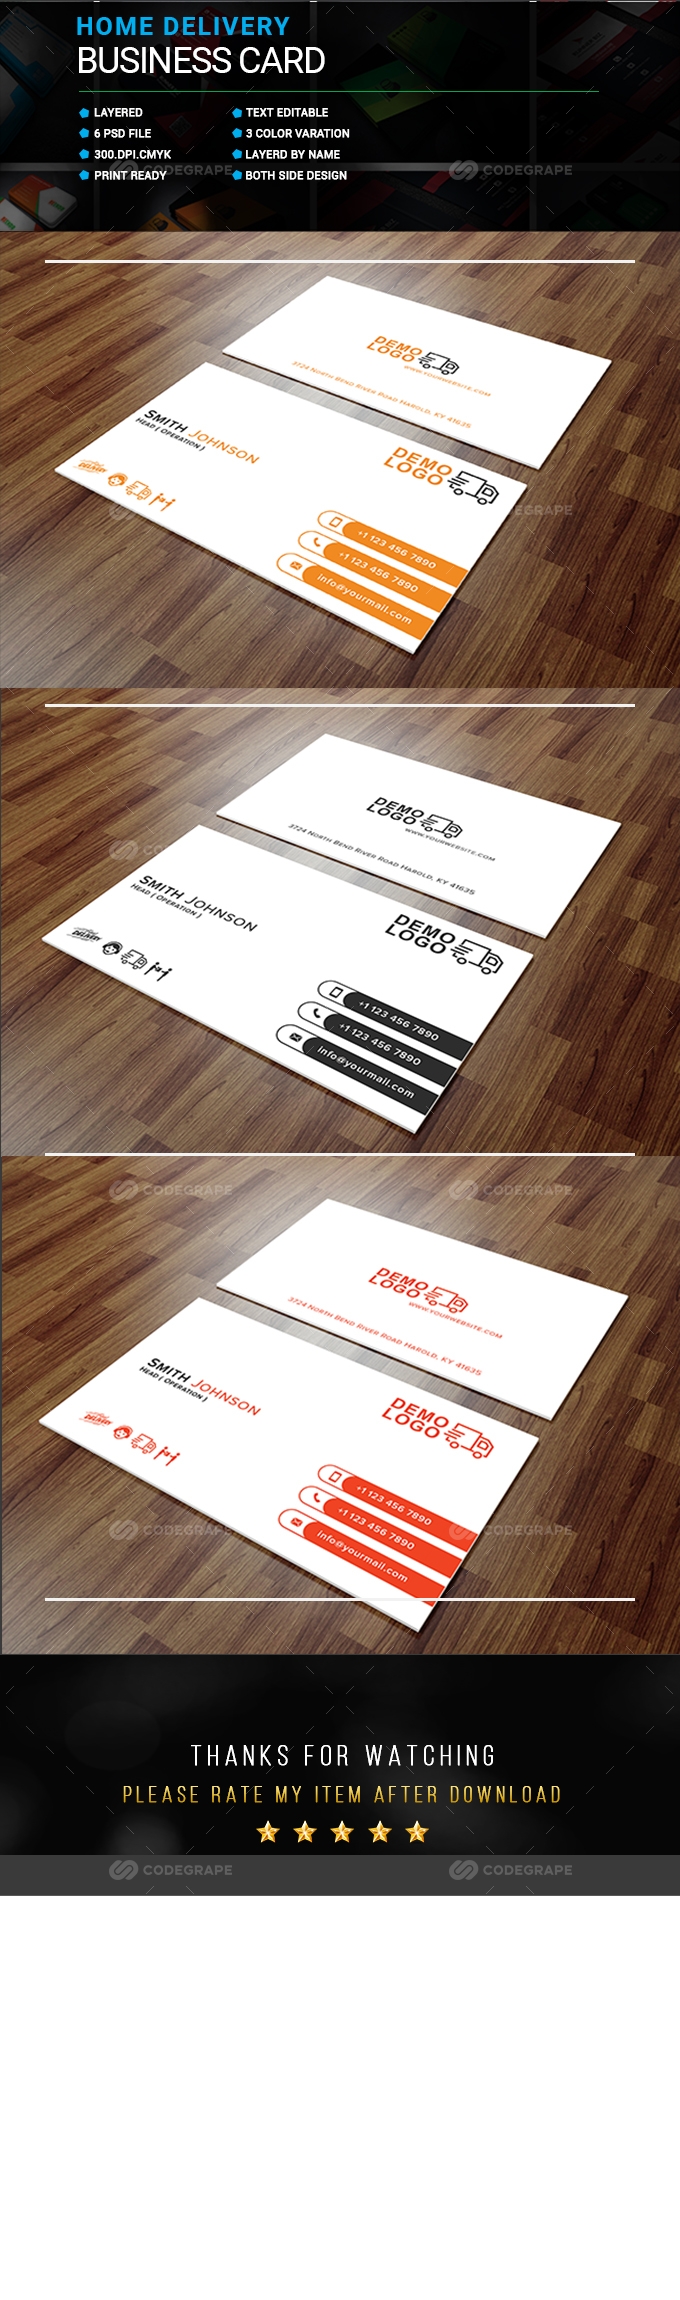 Home Delivery Service Business Card